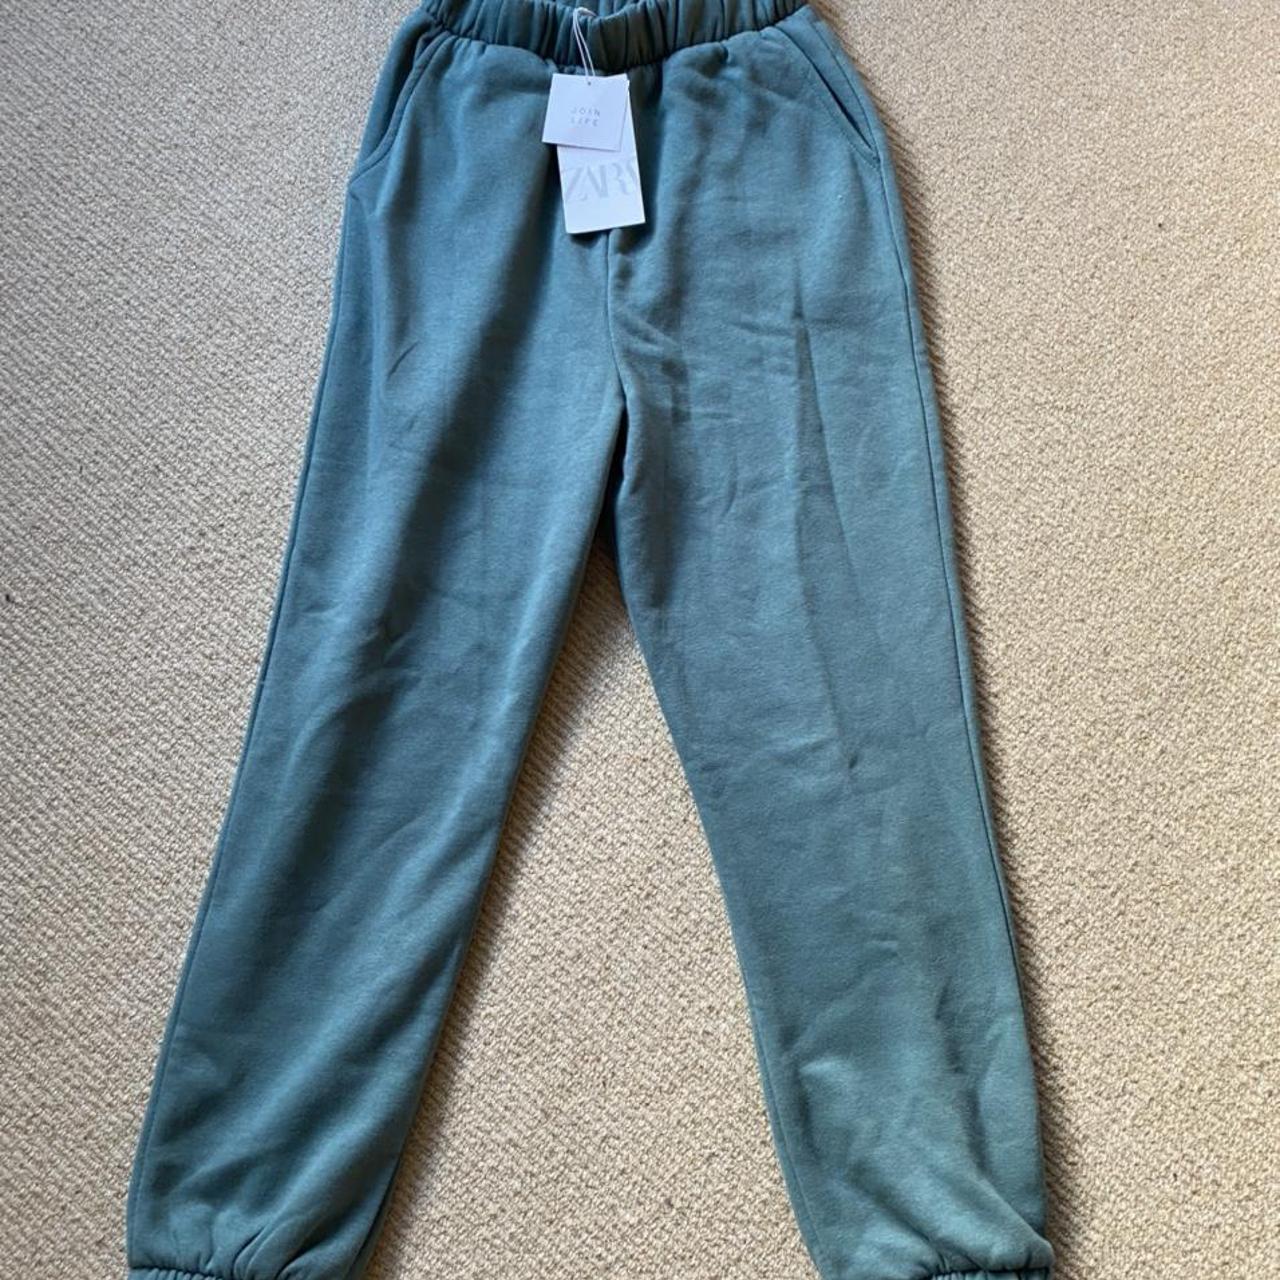 Zara turquoise skinny joggers, size Small, never... - Depop